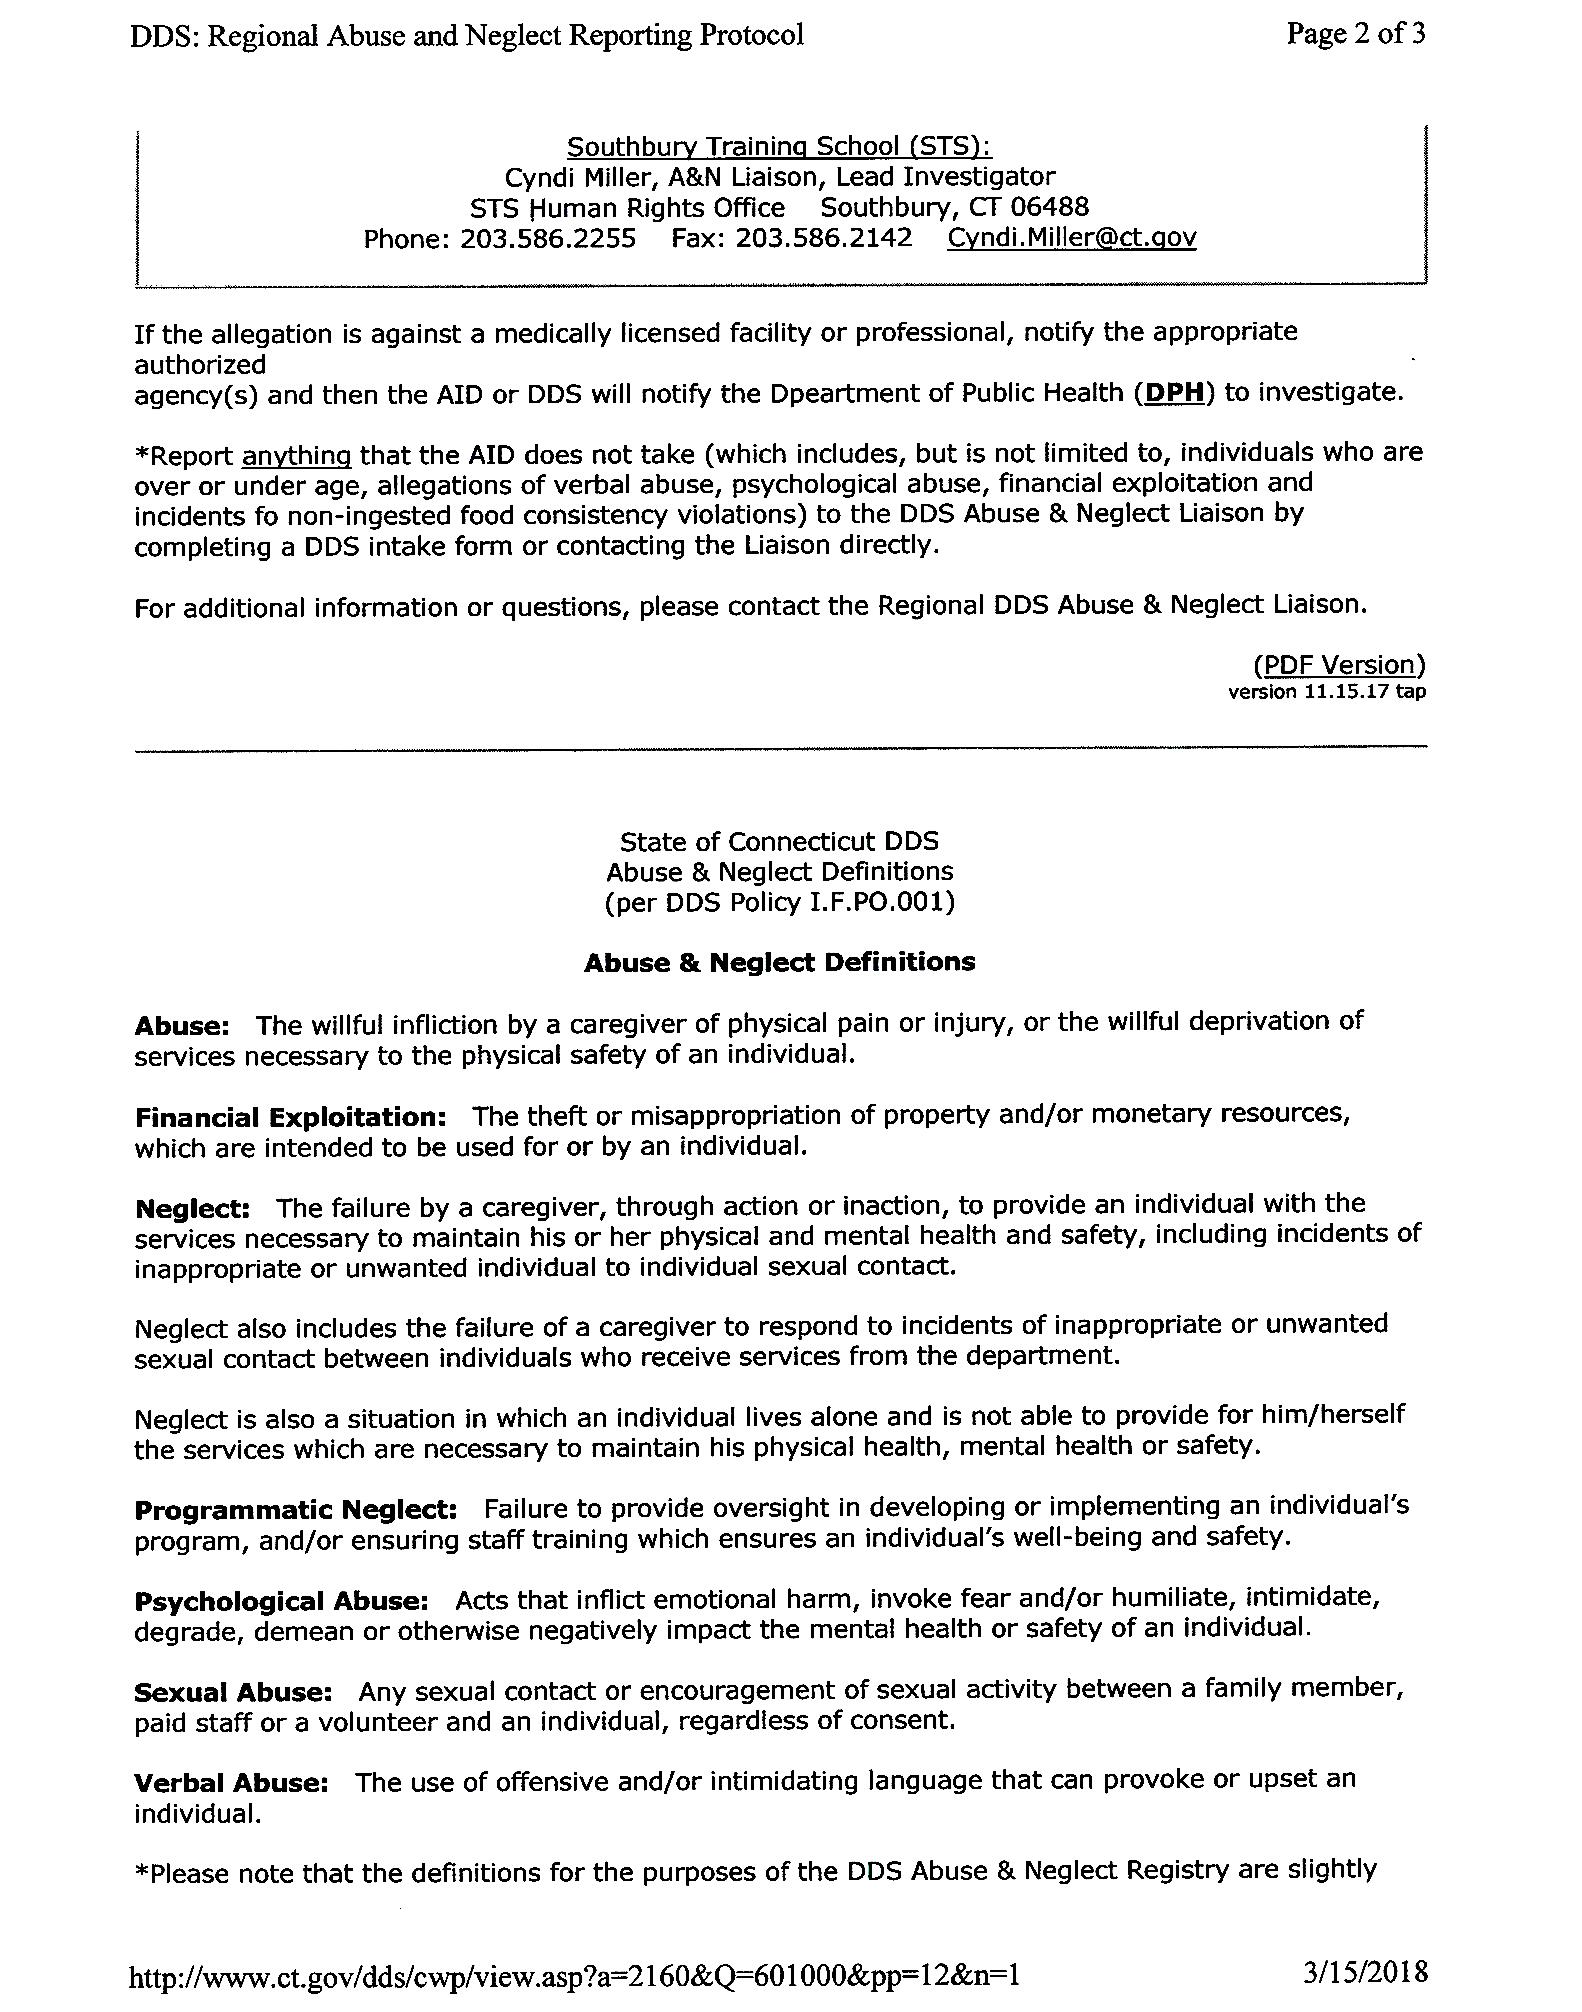 Department of Developmental Services Regional Abuse and Neglect Reporting Protocol - Page 2